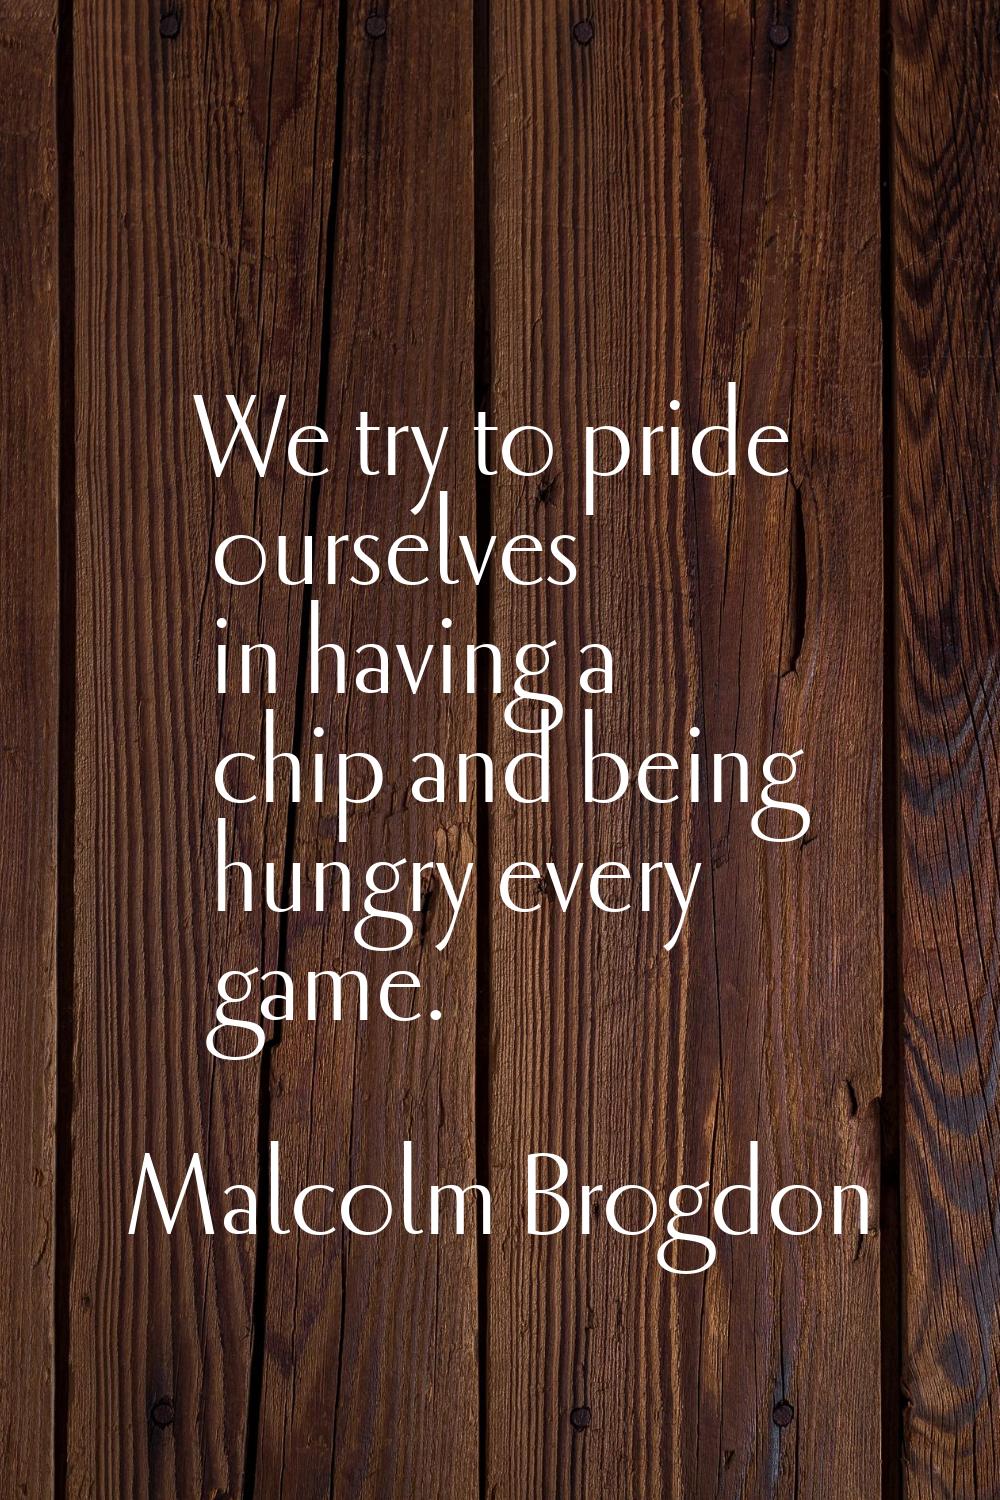 We try to pride ourselves in having a chip and being hungry every game.